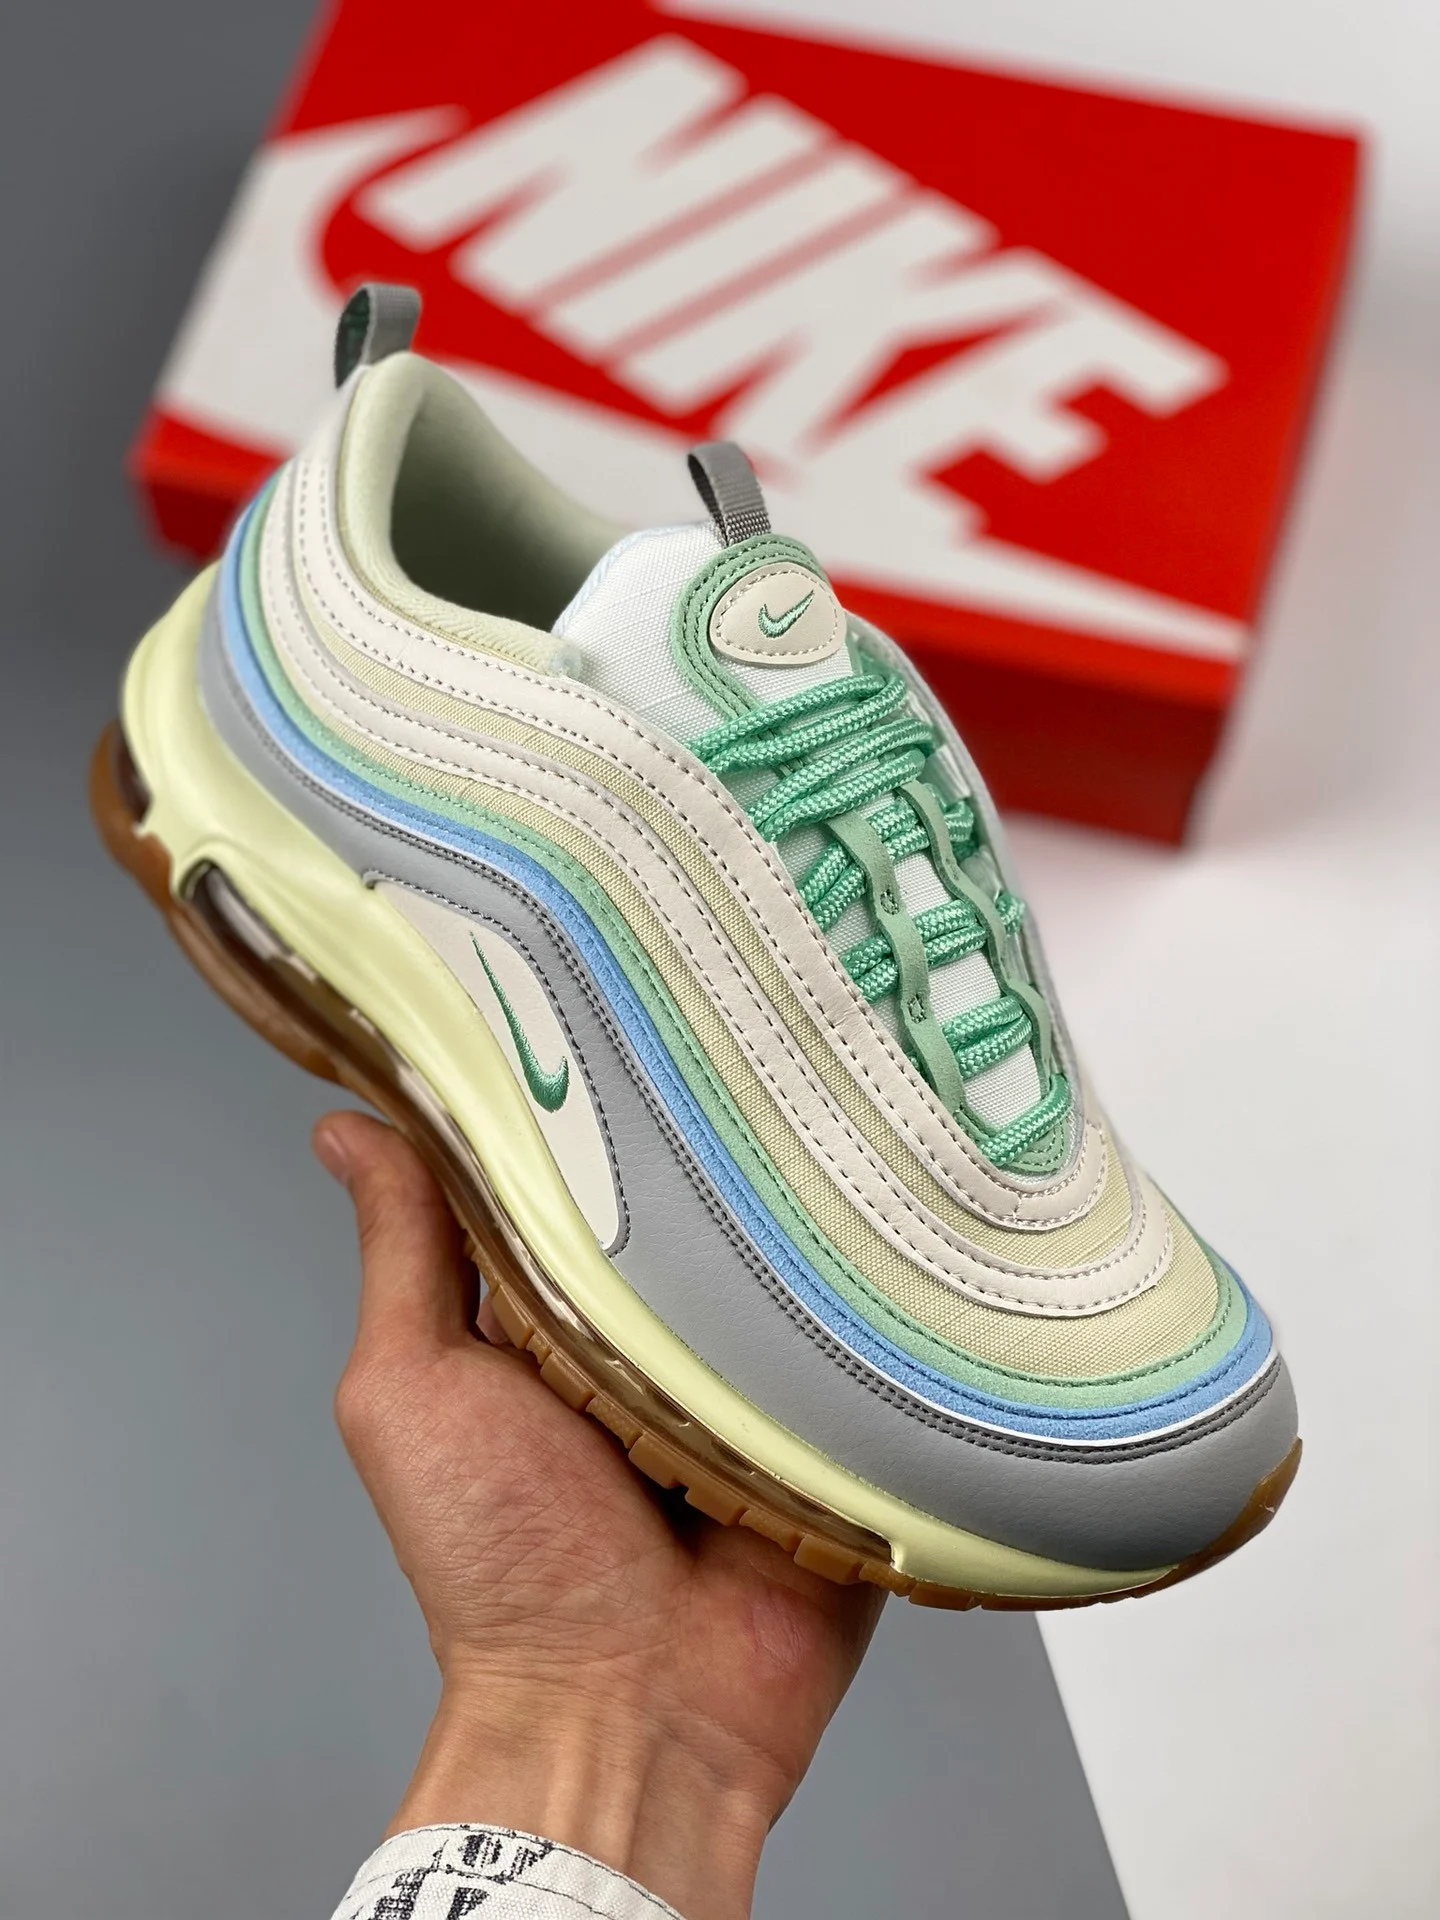 Nike Air Max 97 Certified Fresh Coconut Milk Green DX5766-131 For Sale